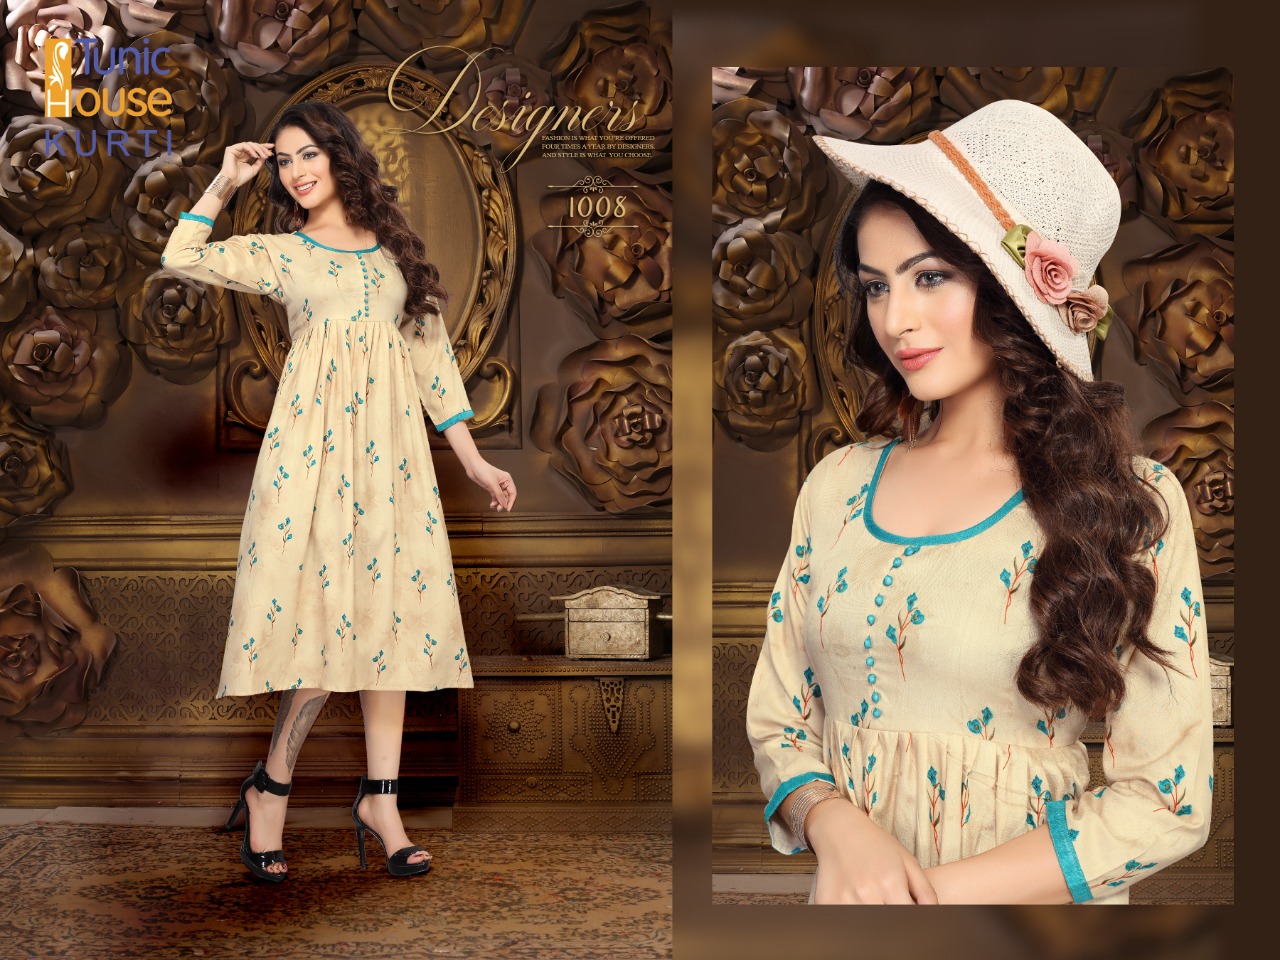 tunic house pracheen colorful collection of kurtis at reasonable rate